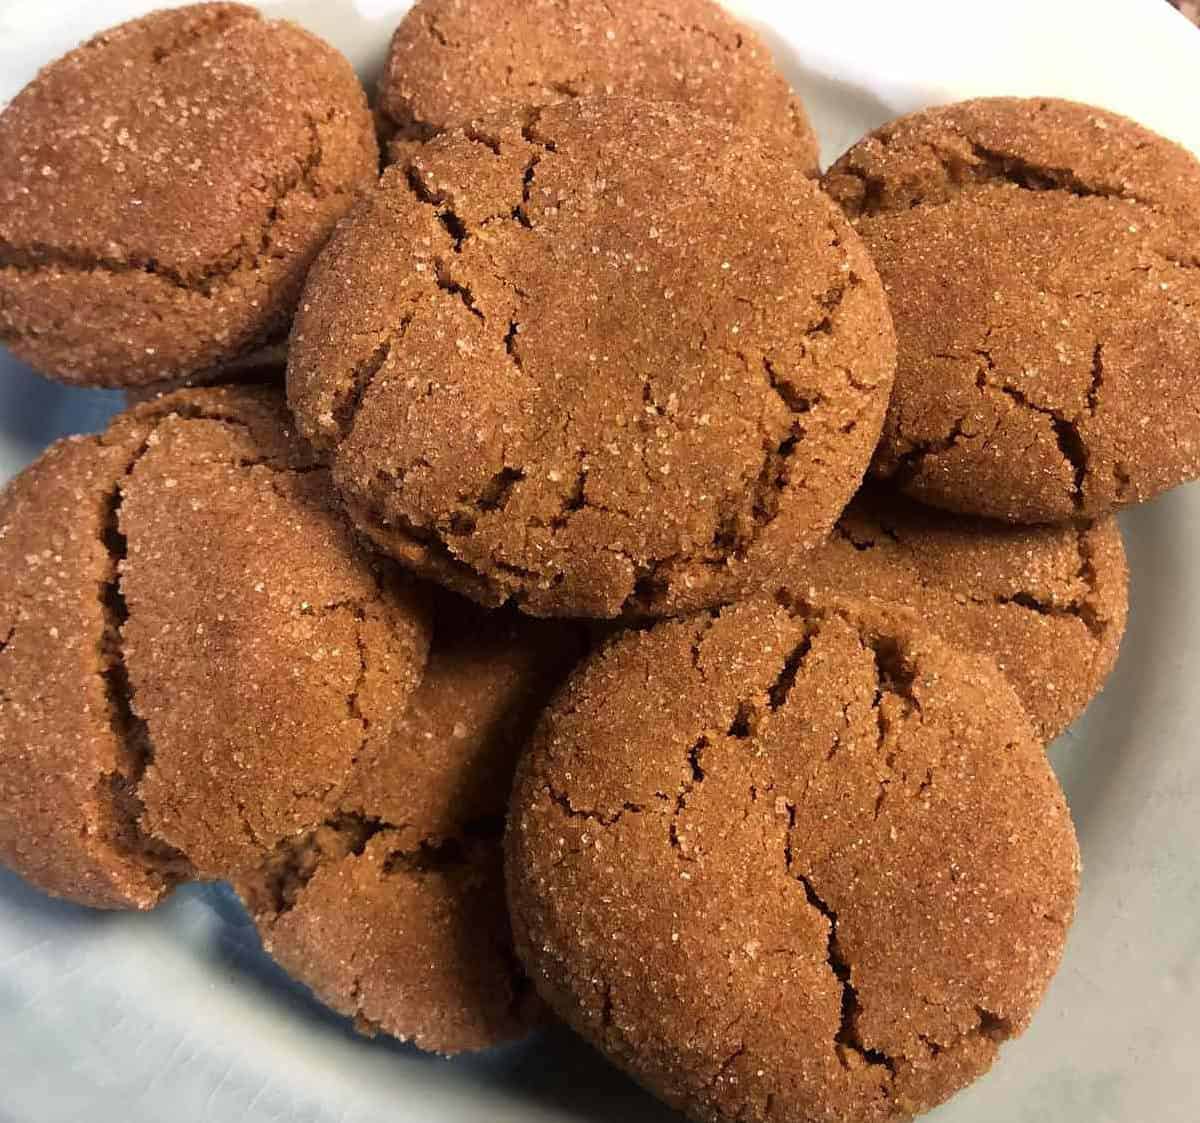  Cozy up with a mug of tea and these delicious ginger snaps.